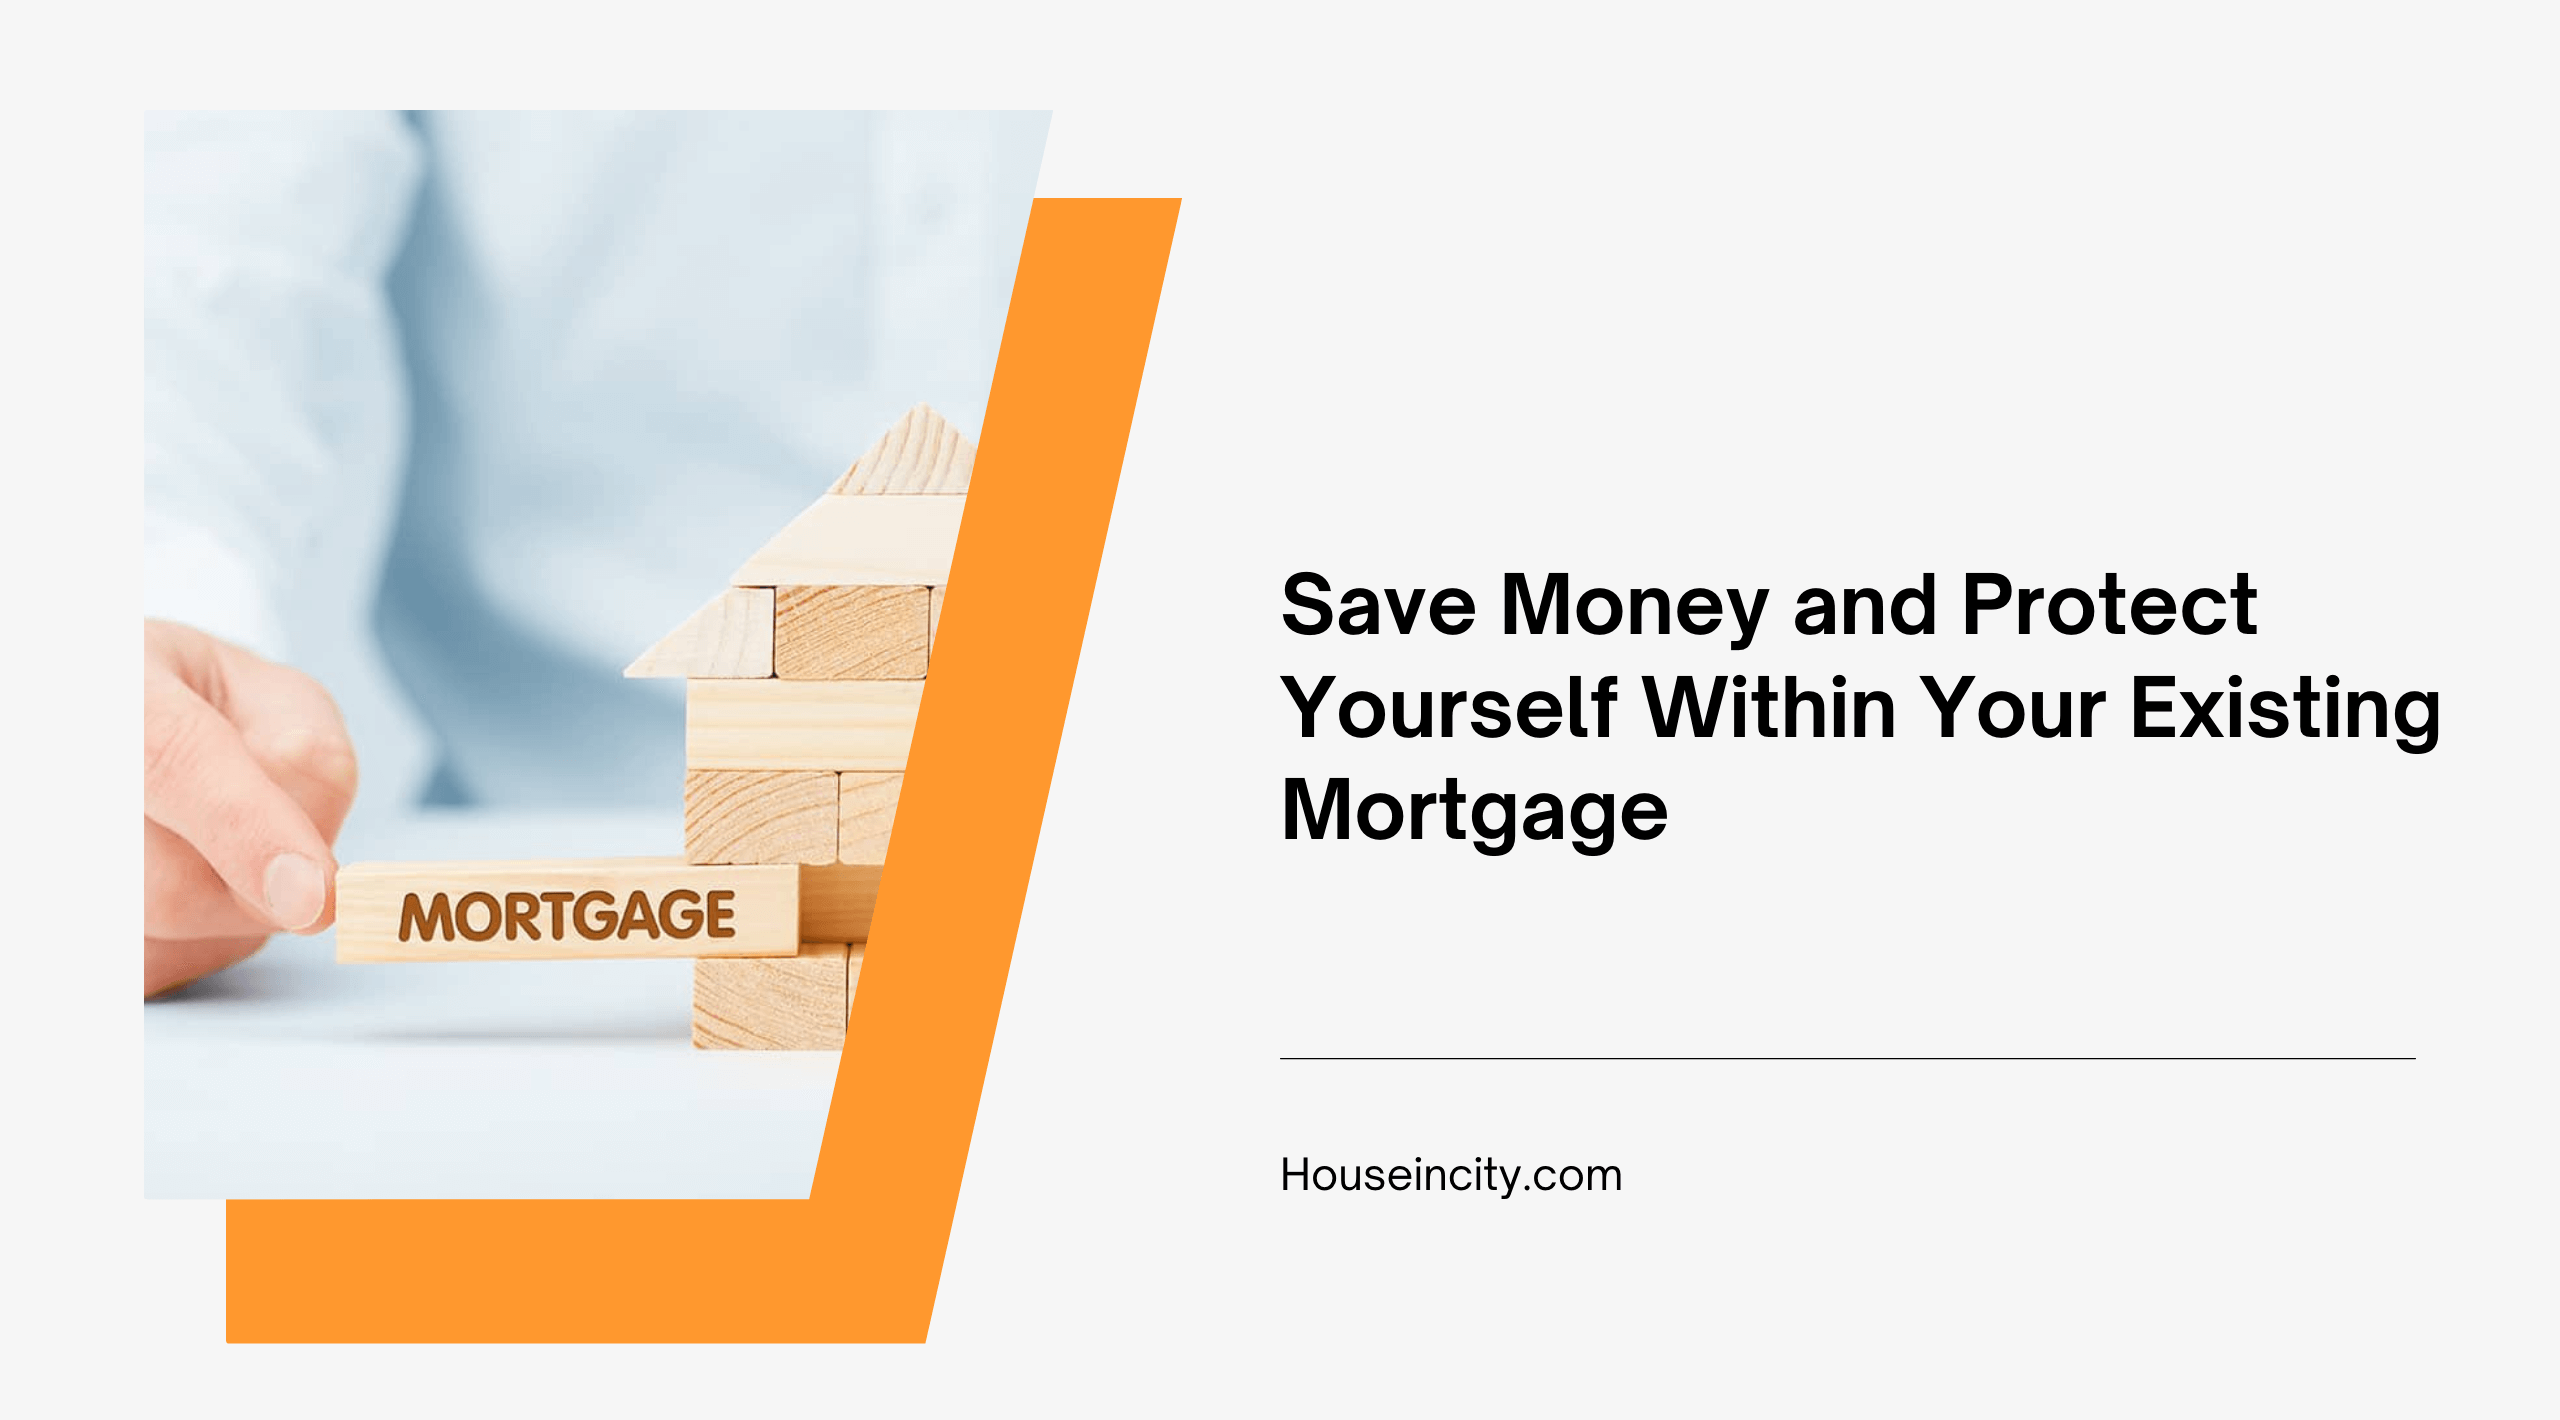 Save Money and Protect Yourself Within Your Existing Mortgage